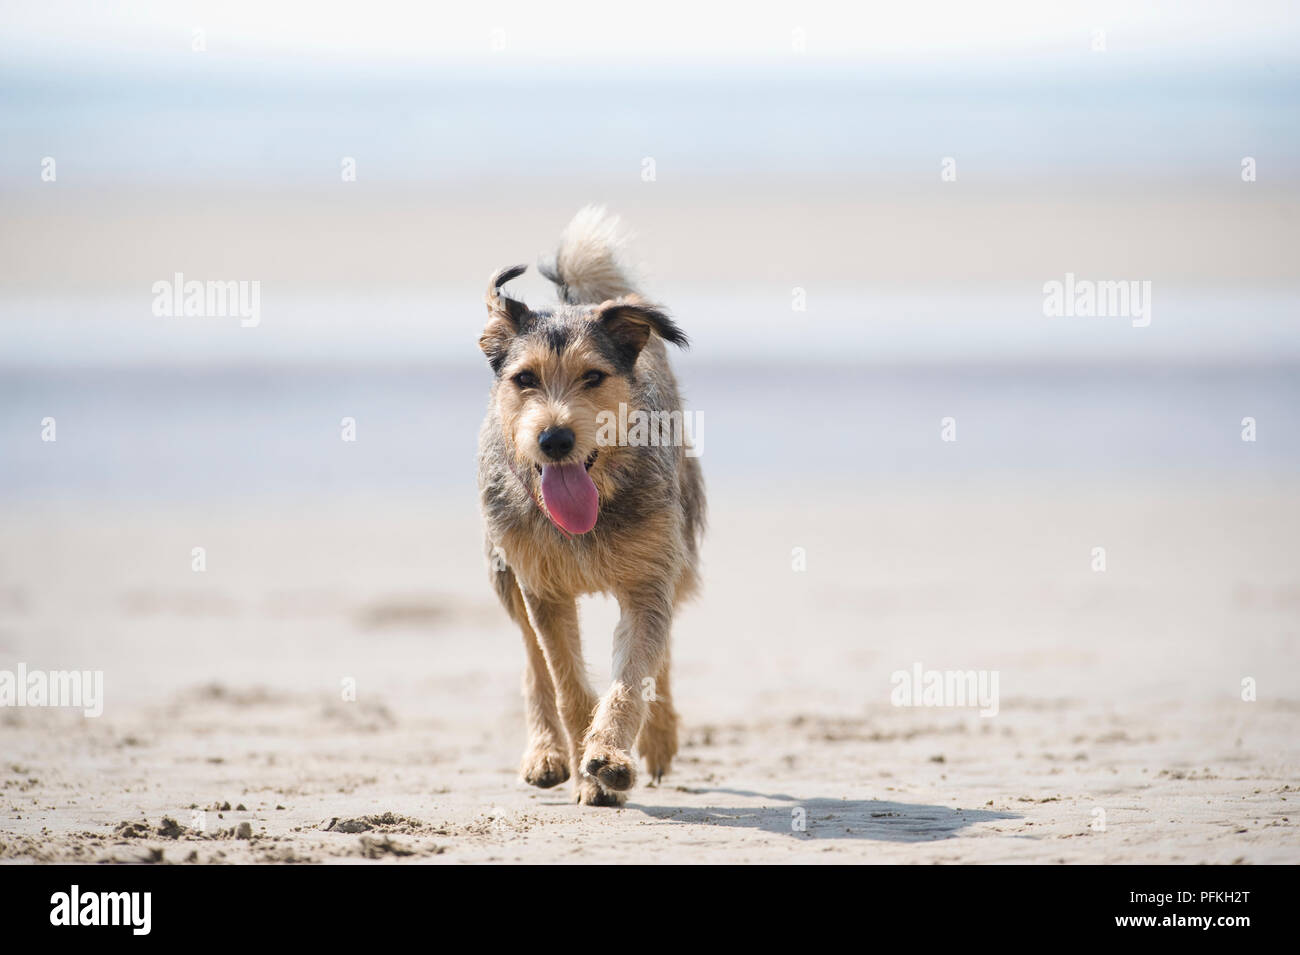 Mongrel dog with tongue sticking out walking along beach, front view Stock Photo